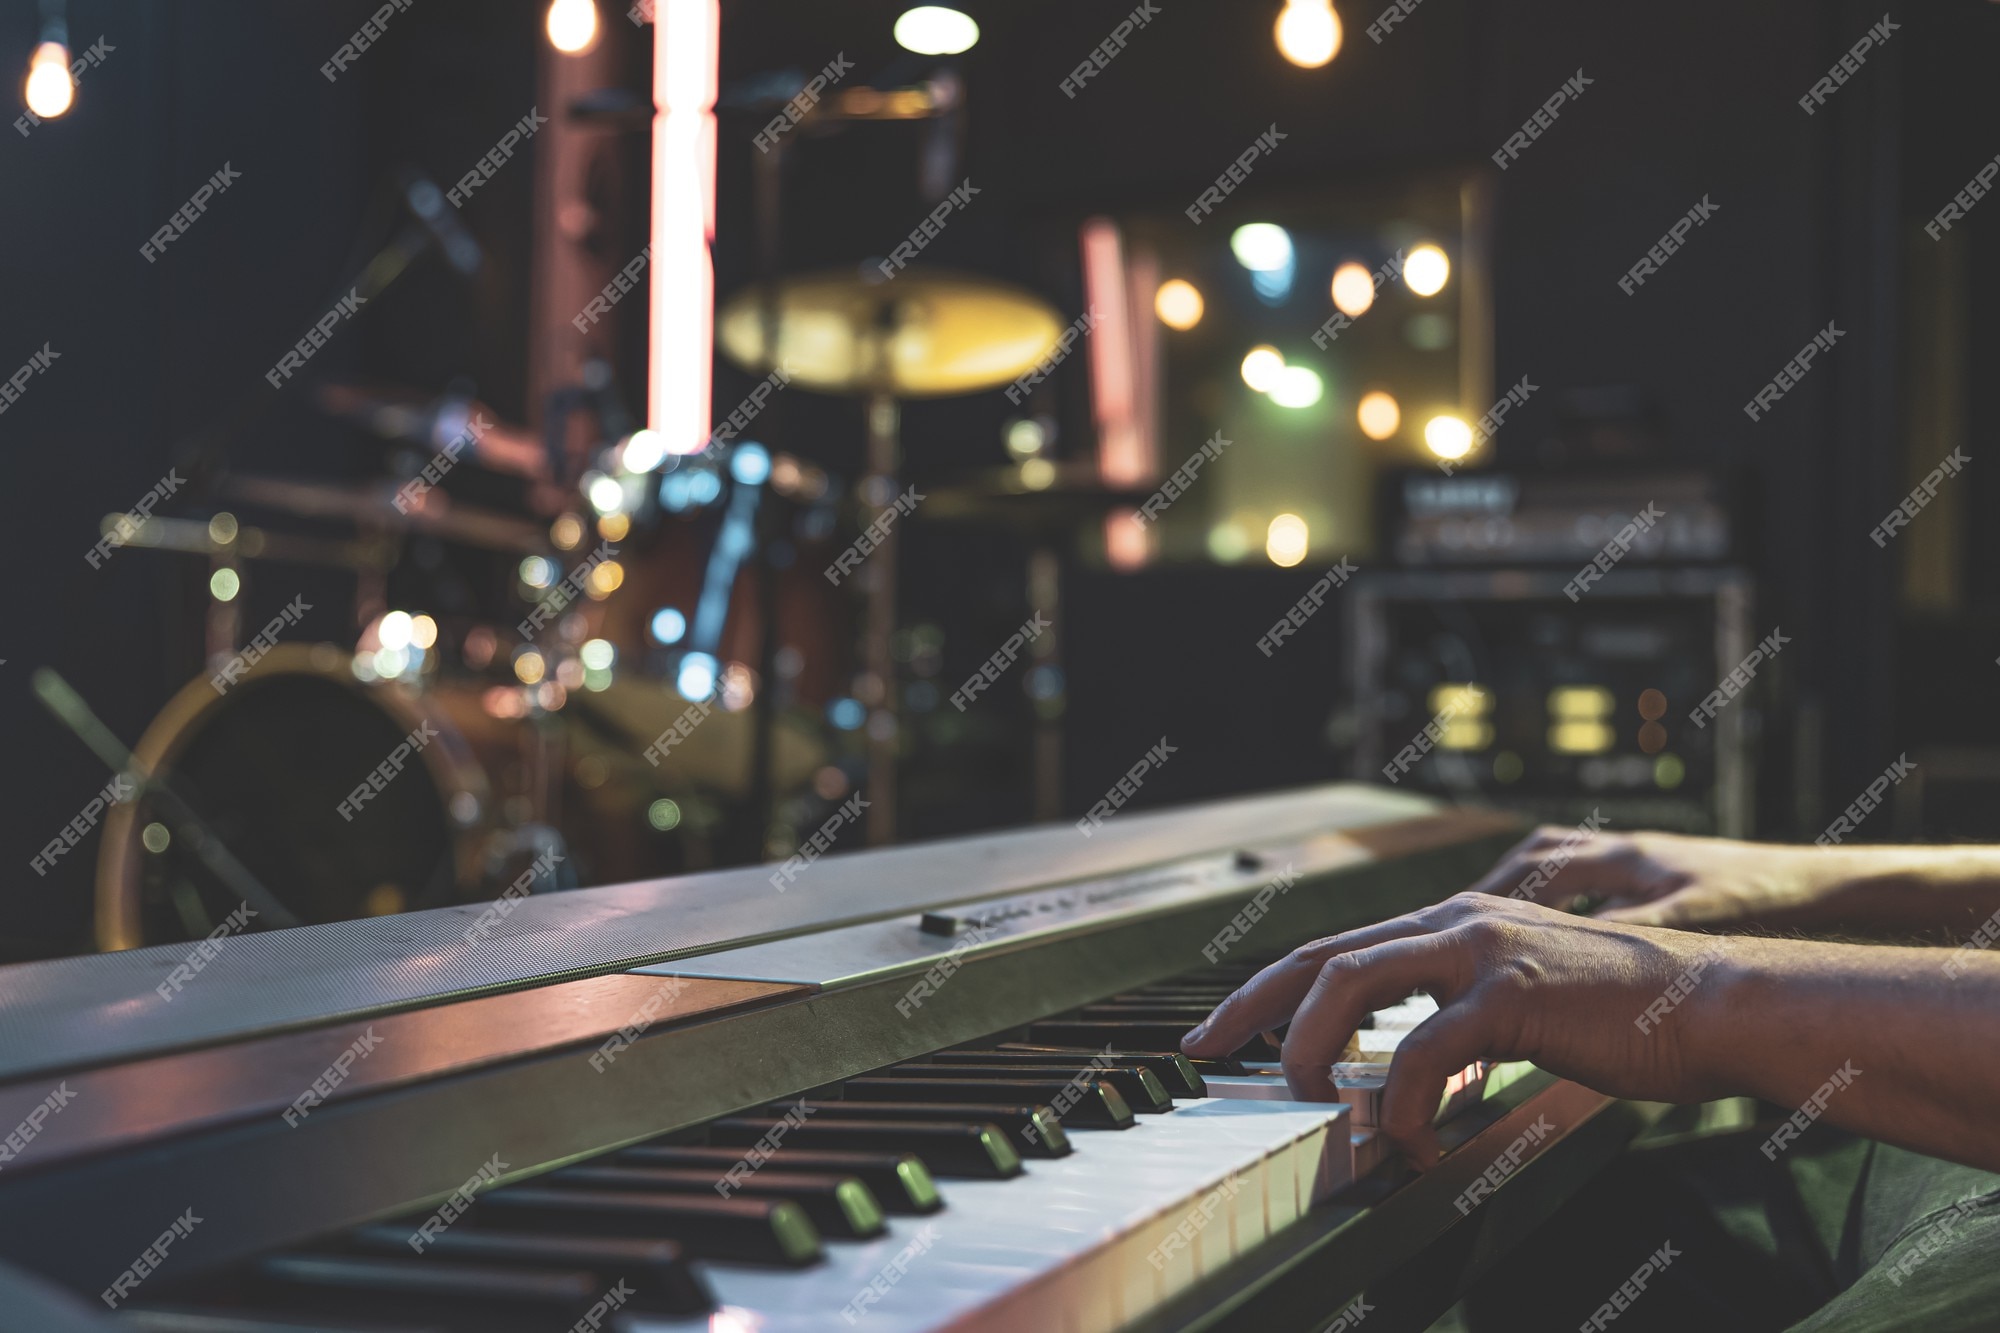 Piano Stage Images - Free Download on Freepik